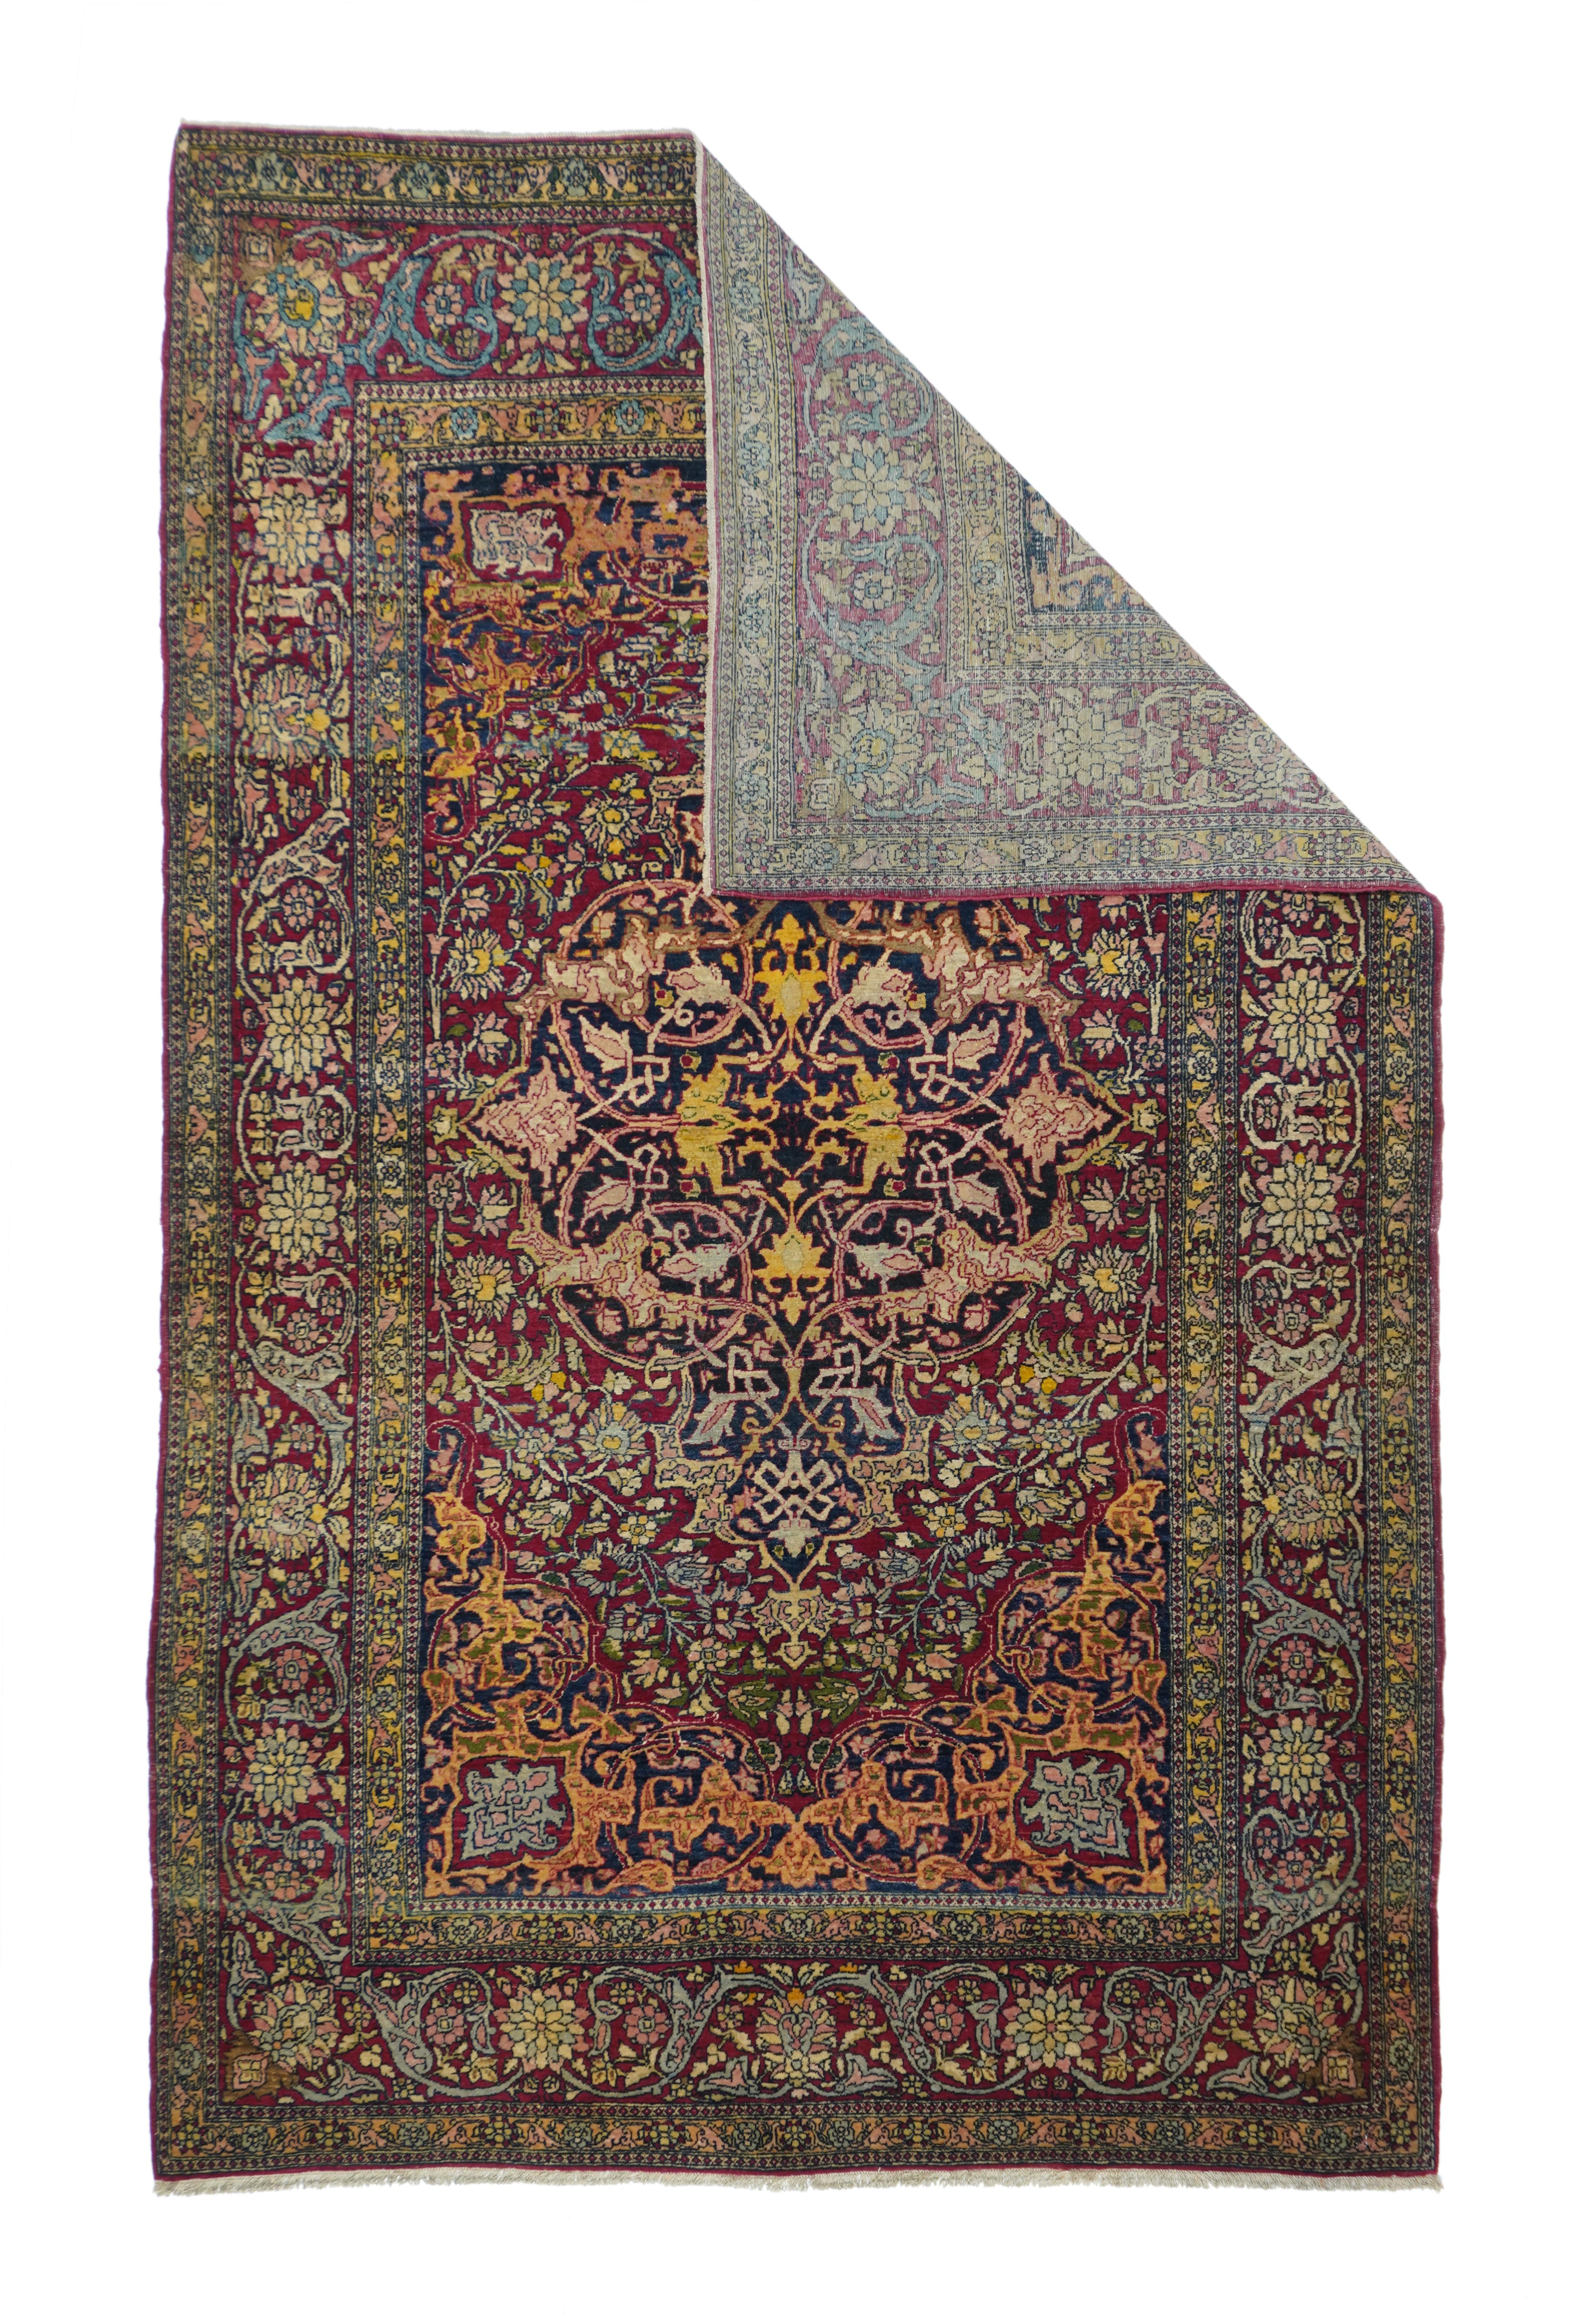 Antique Isfahan rug measures: 4'5'' x 7'0''.